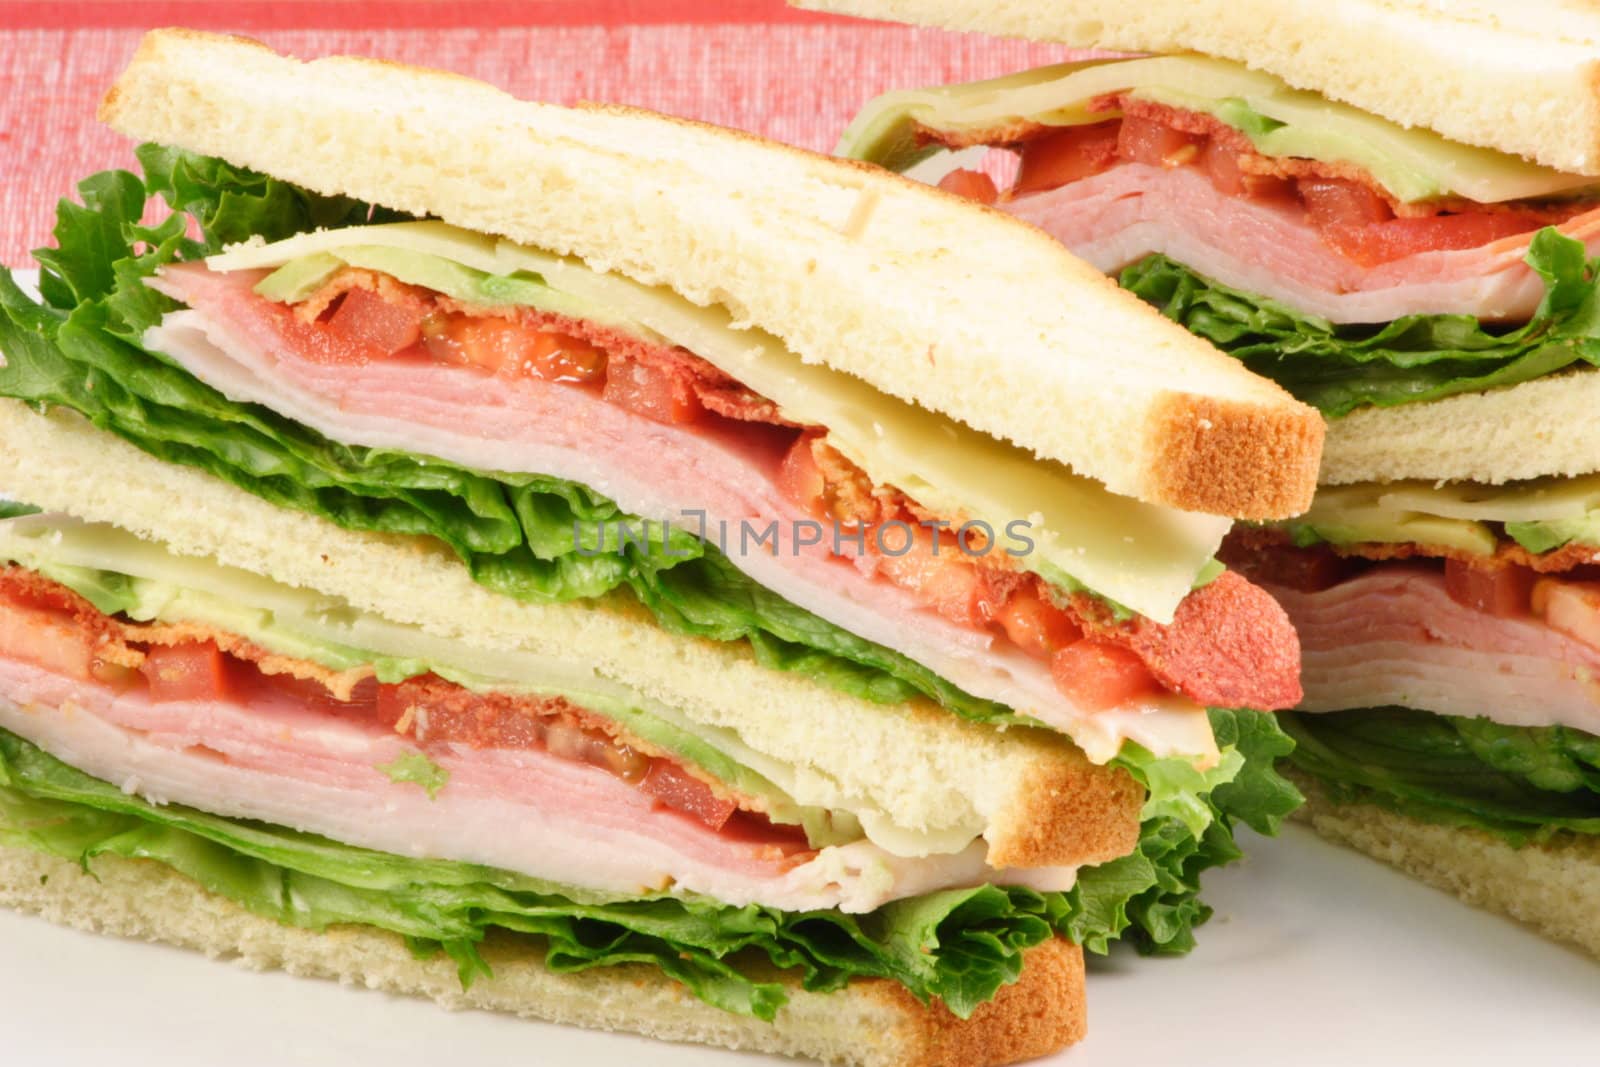 delicious fresh sandwich made with fine meats